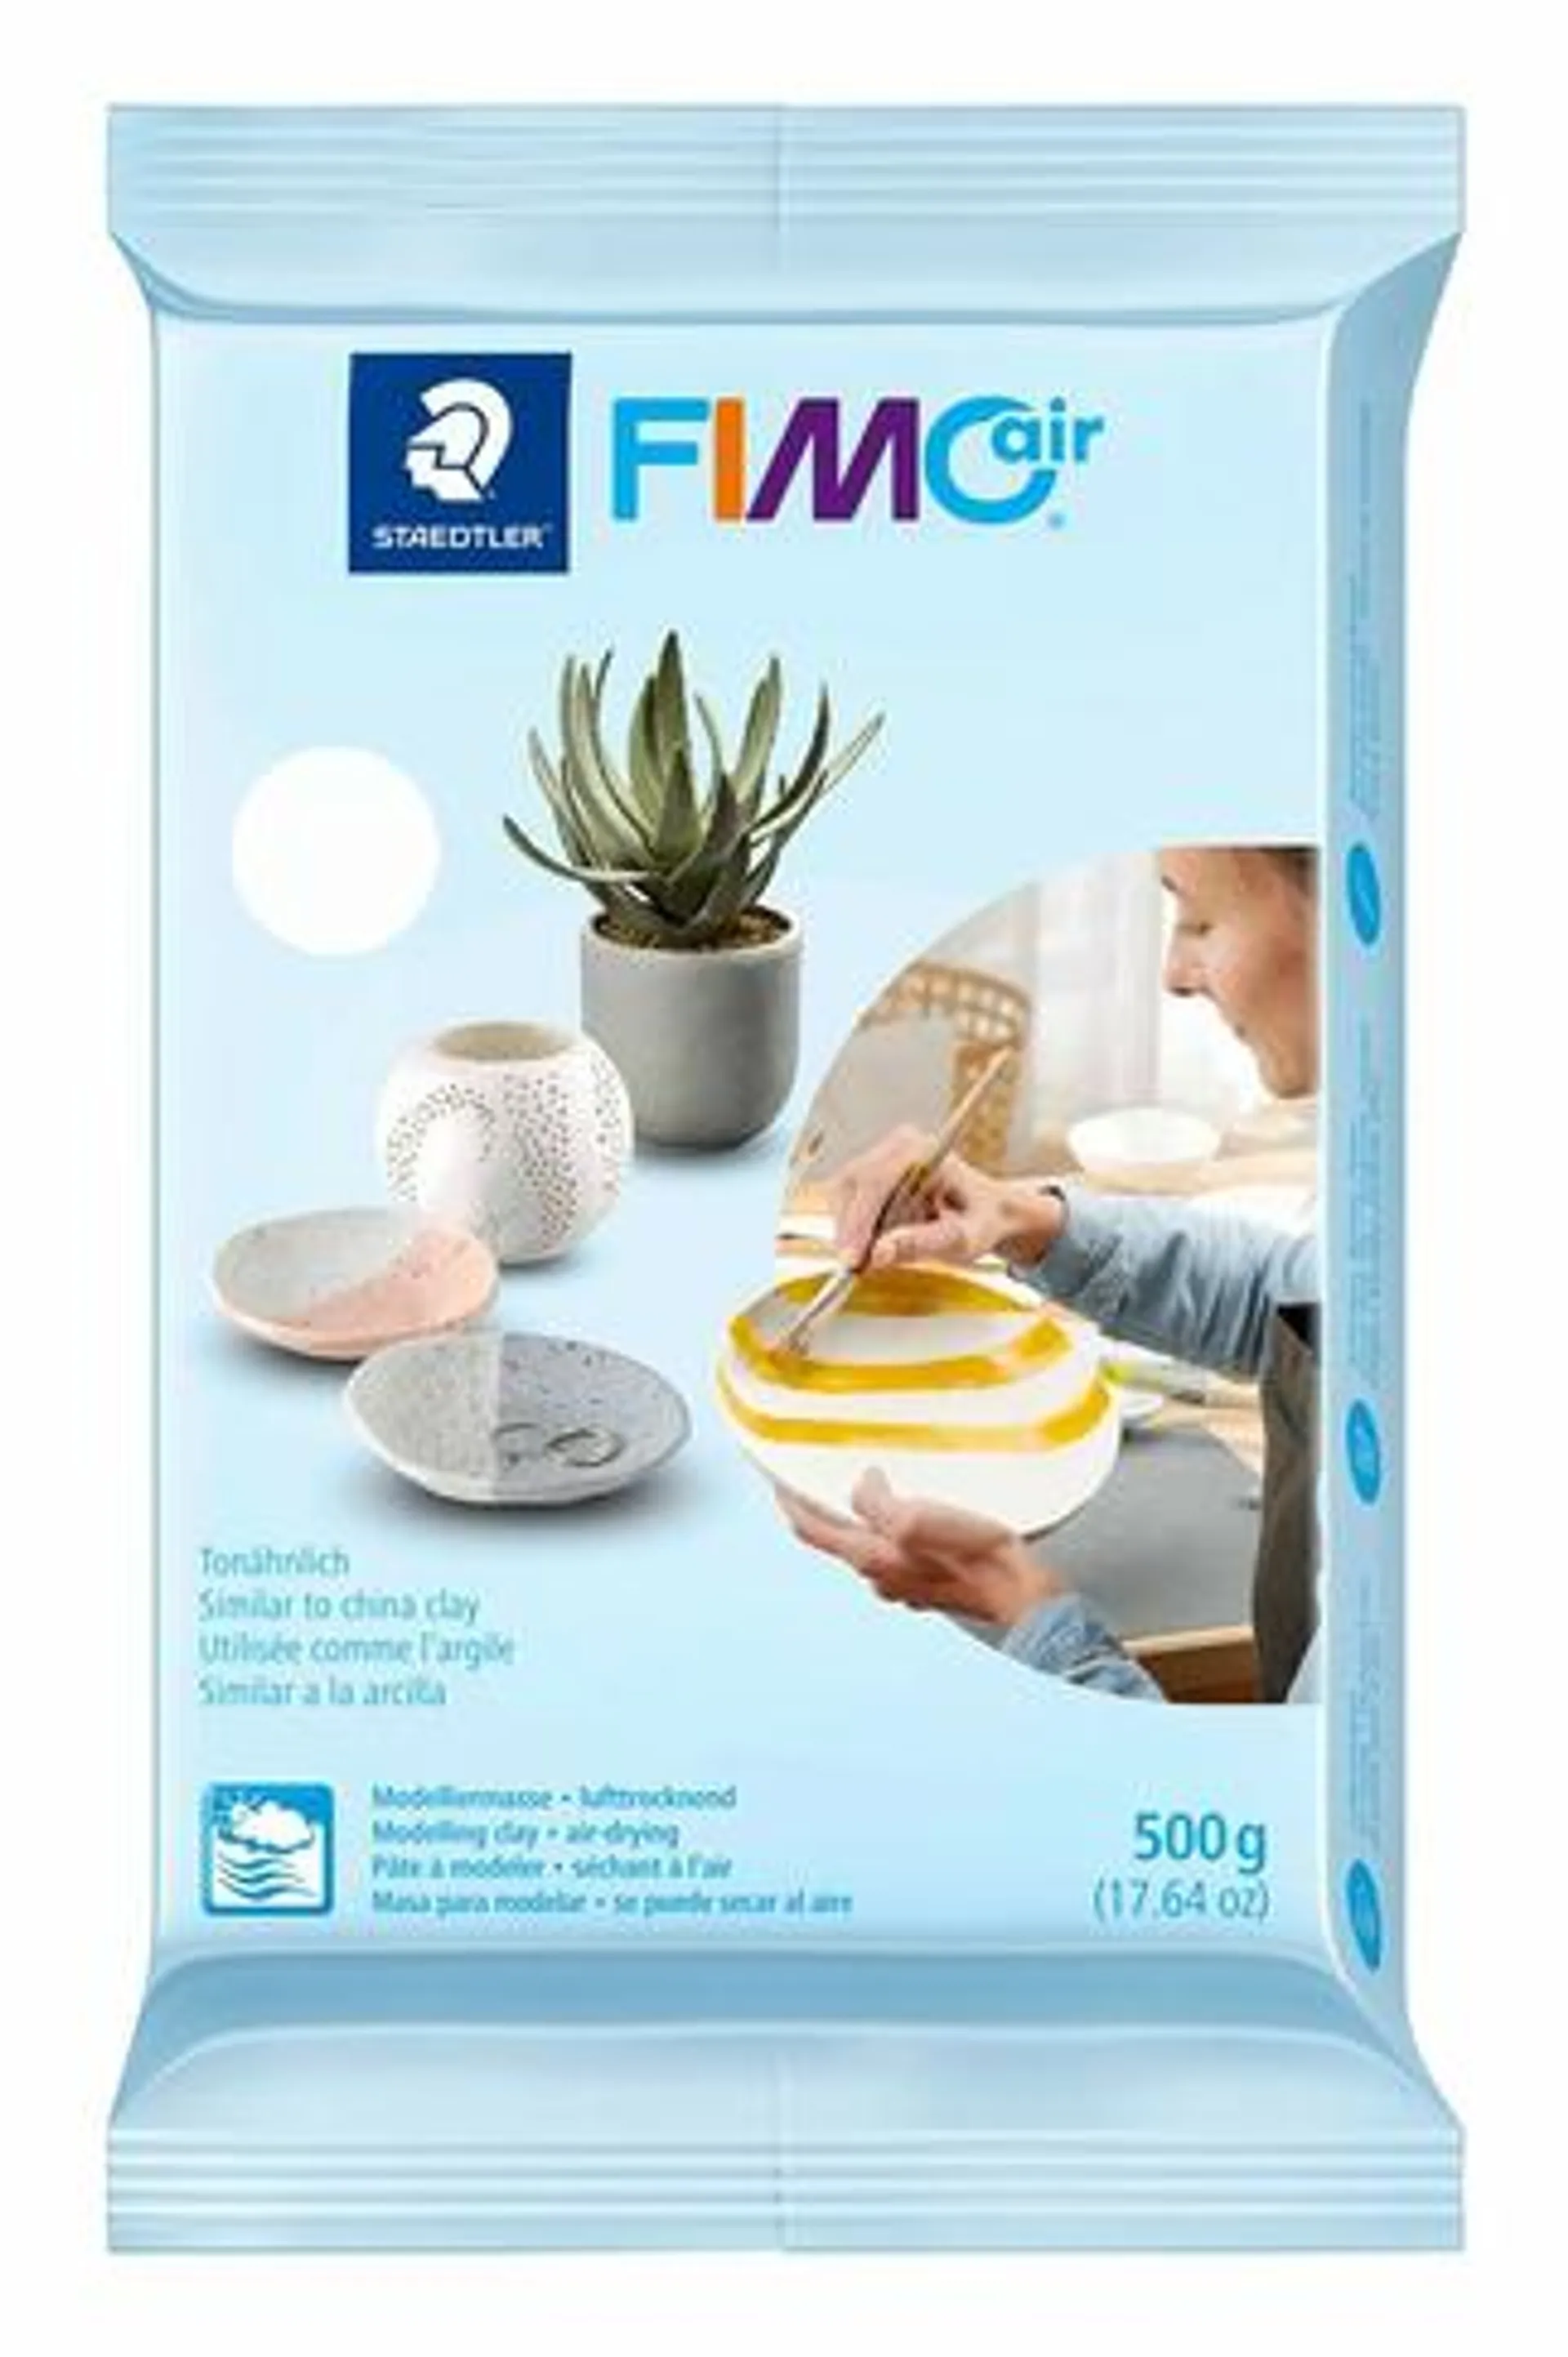 STAEDTLER FIMO Air Basic Modelling Clay 500g White